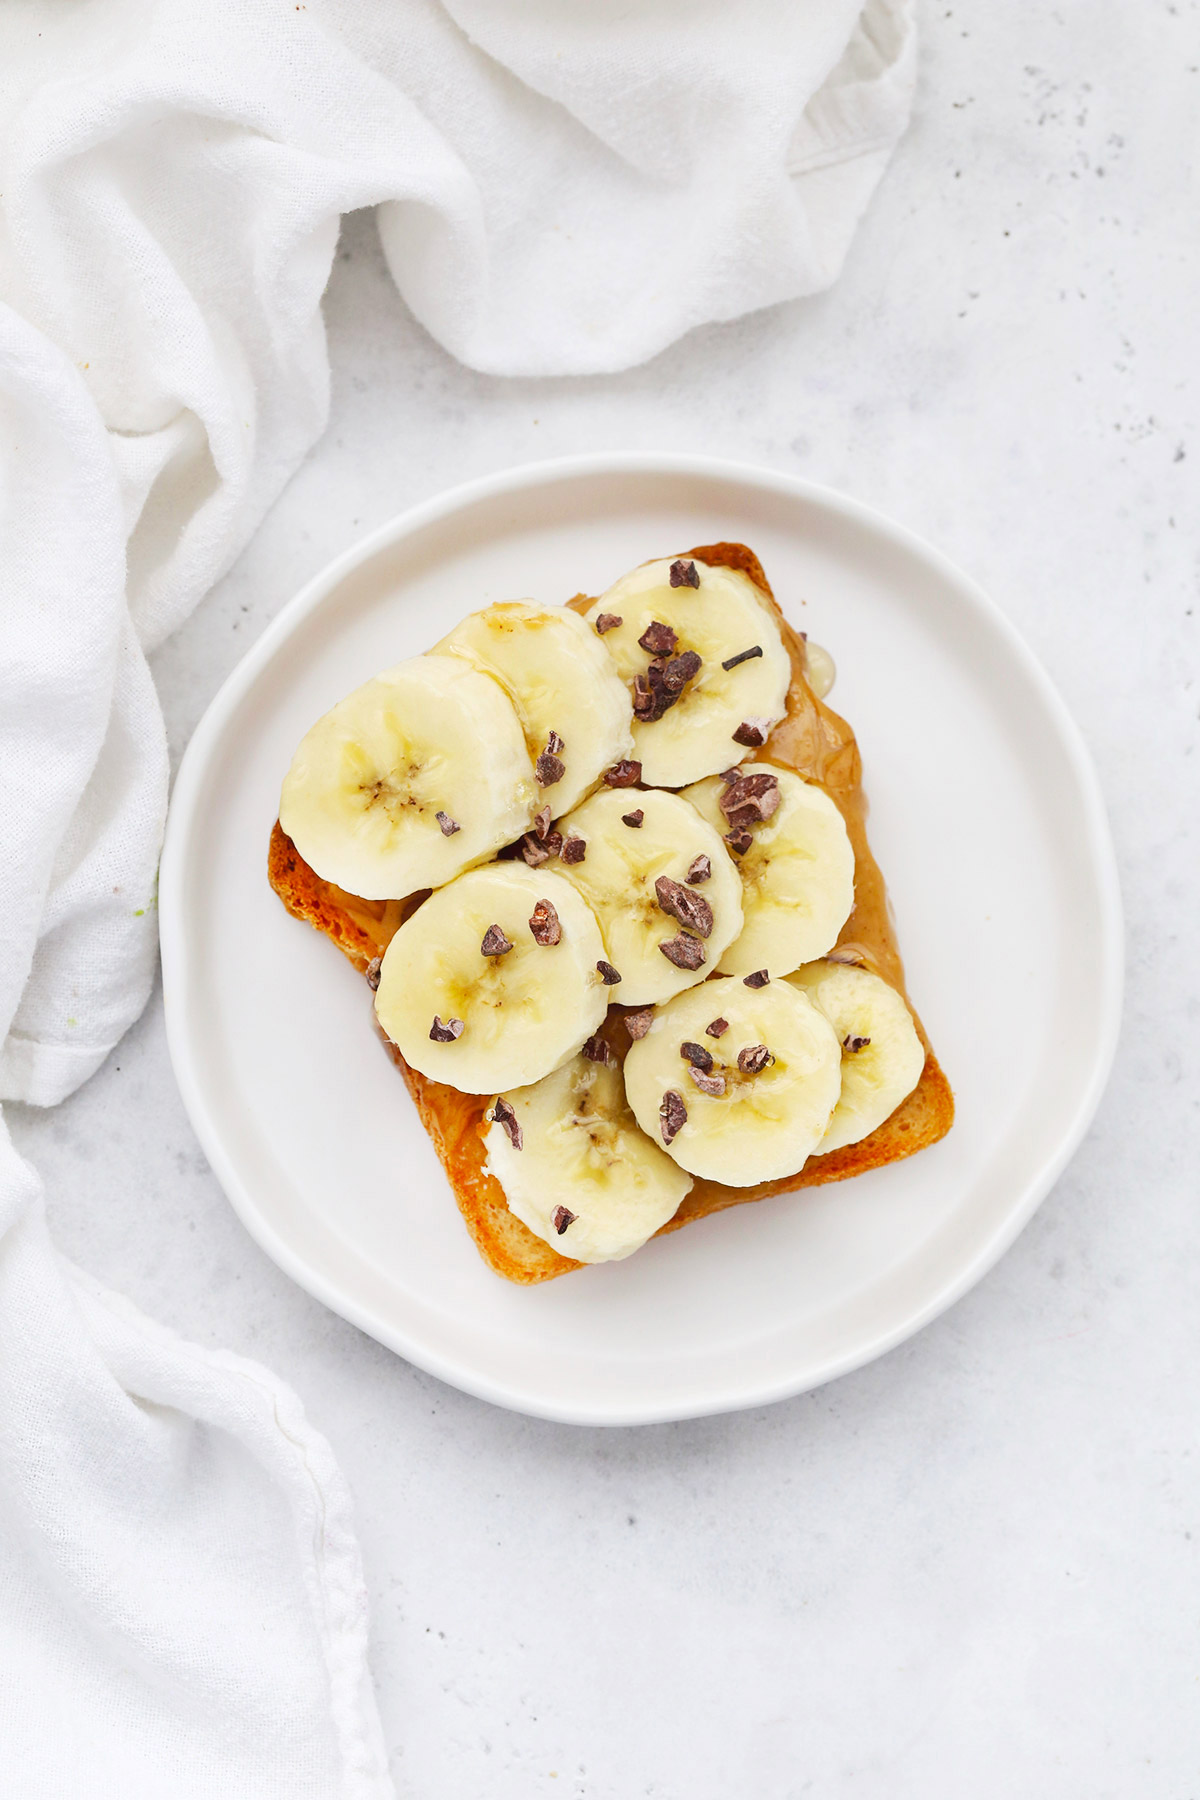 Gluten-Free Toast with Peanut Butter, Bananas, and Cacao Nibs